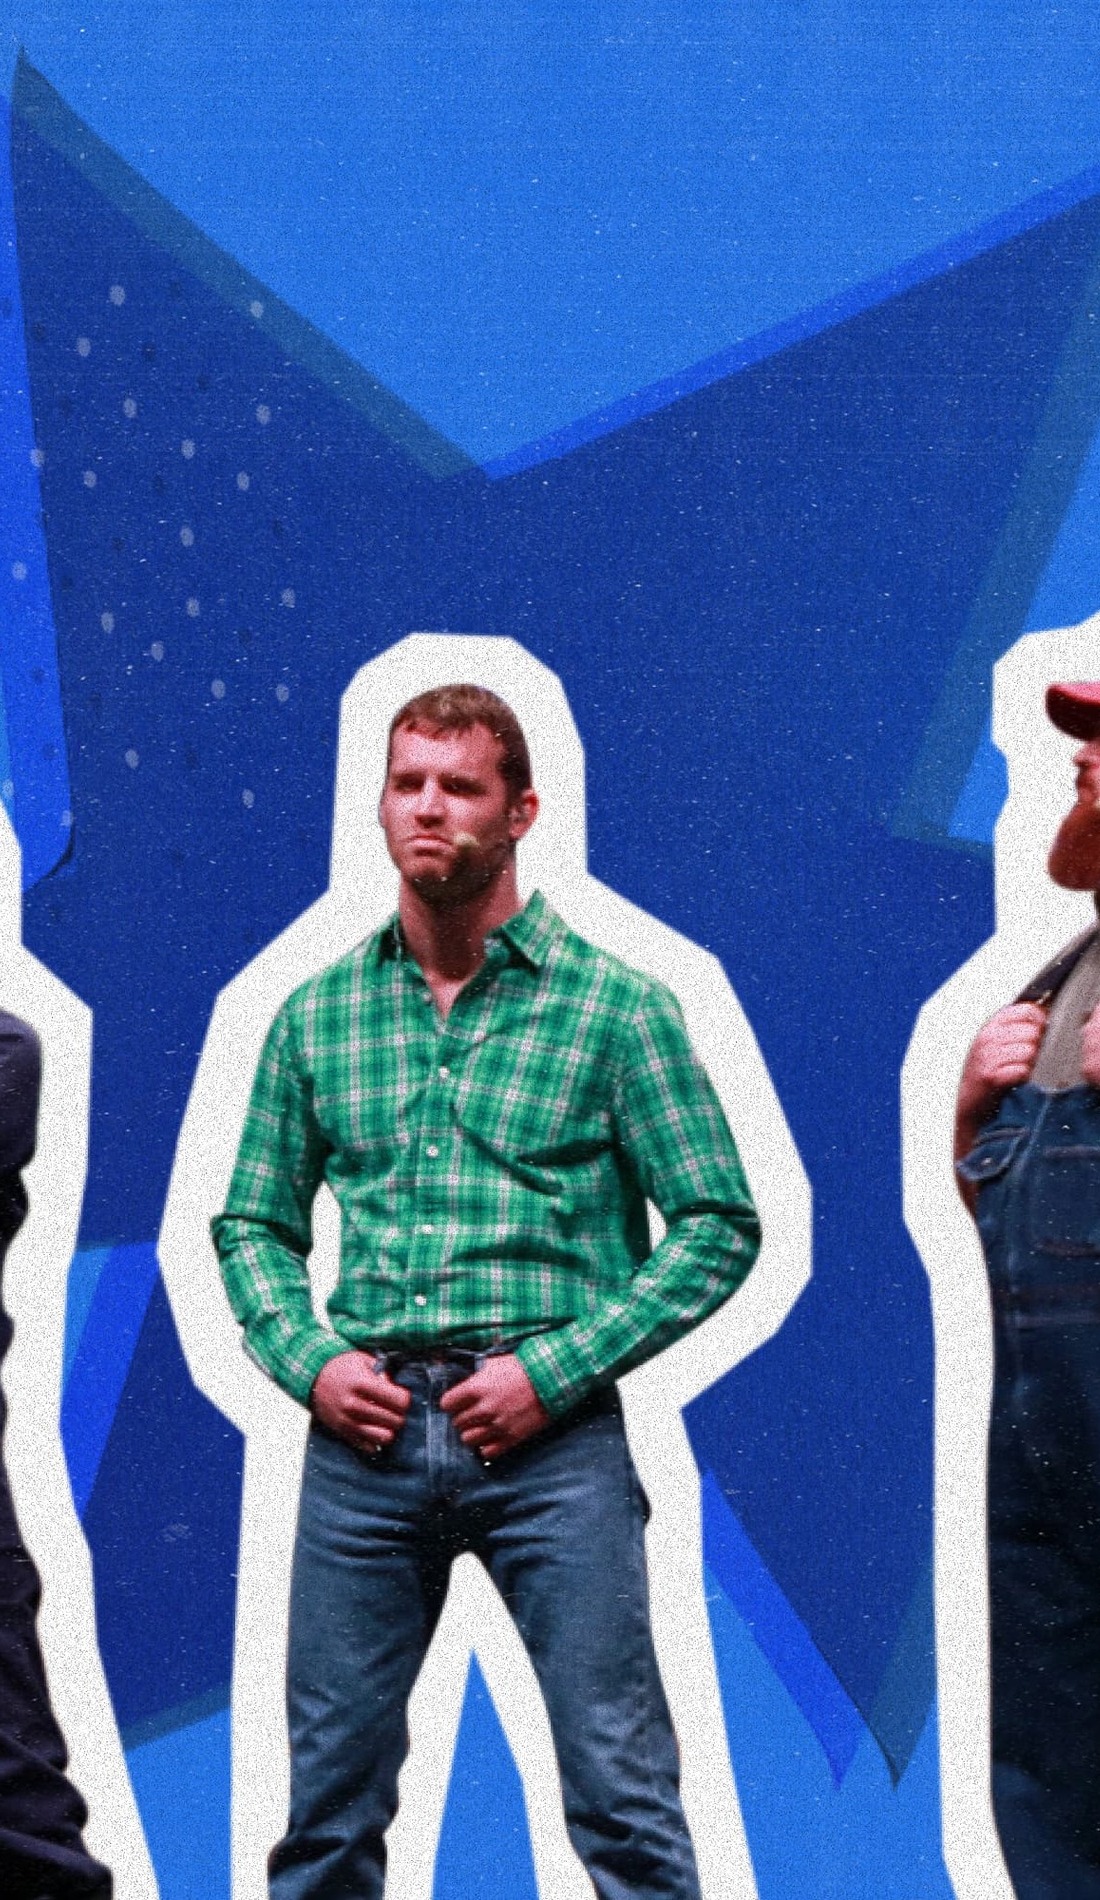 A LETTERKENNY LIVE! live event